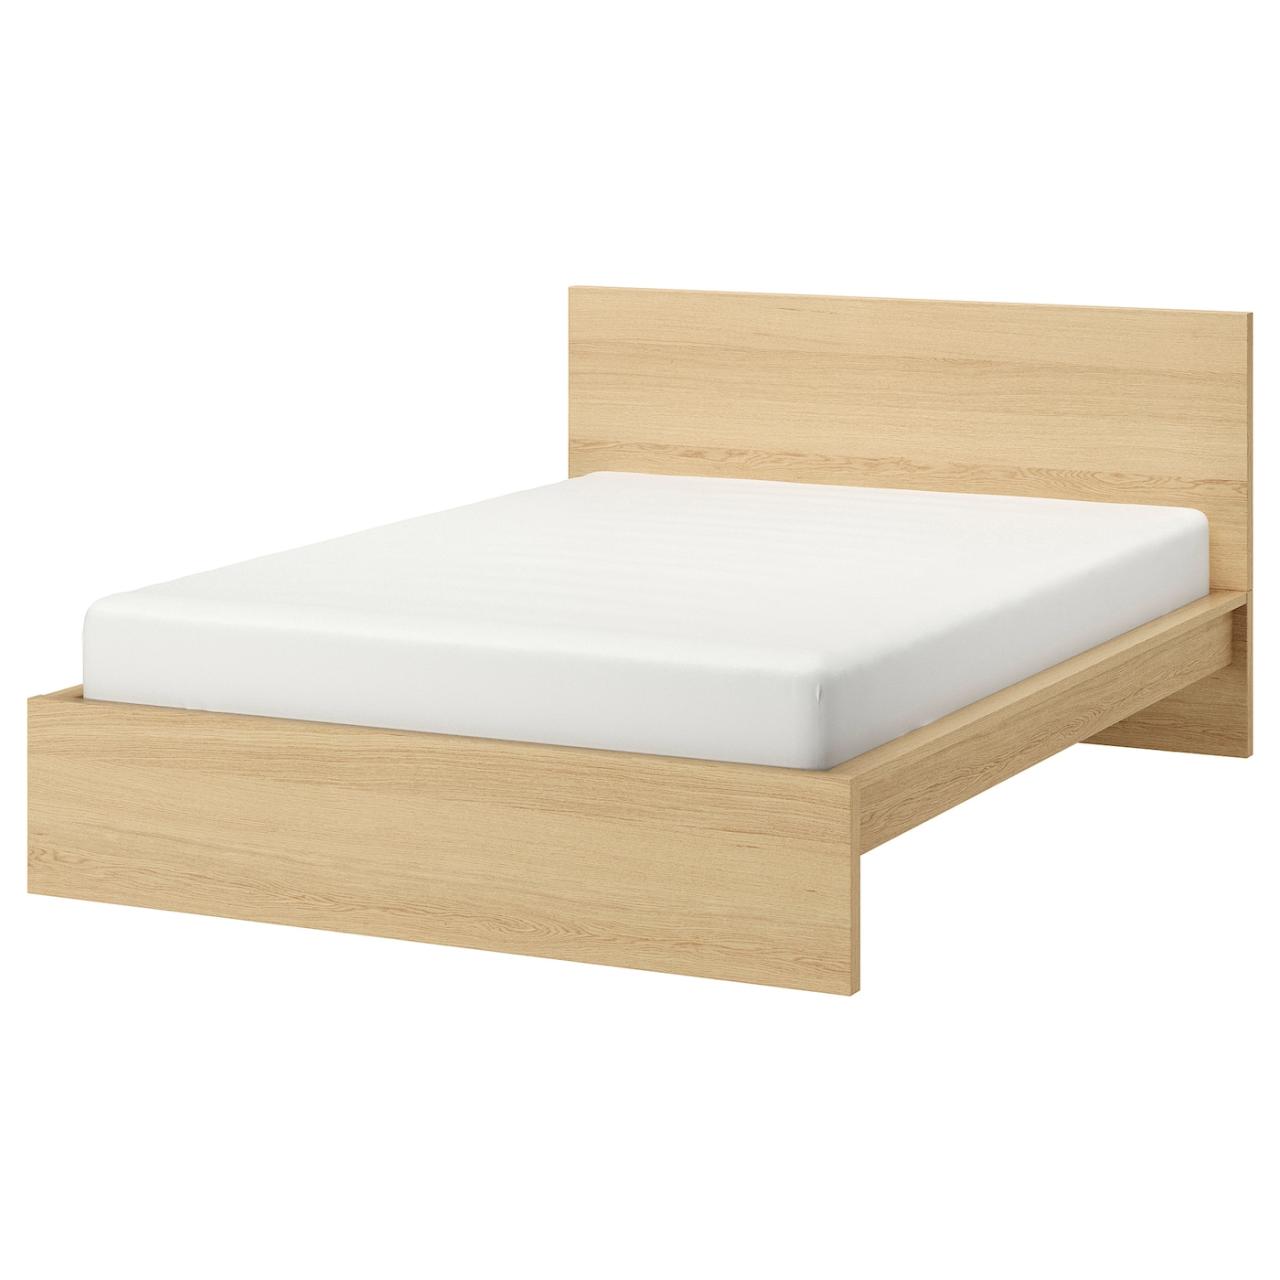 Malm Bed Frame, High, White Stained Oak Veneer, Queen - Ikea